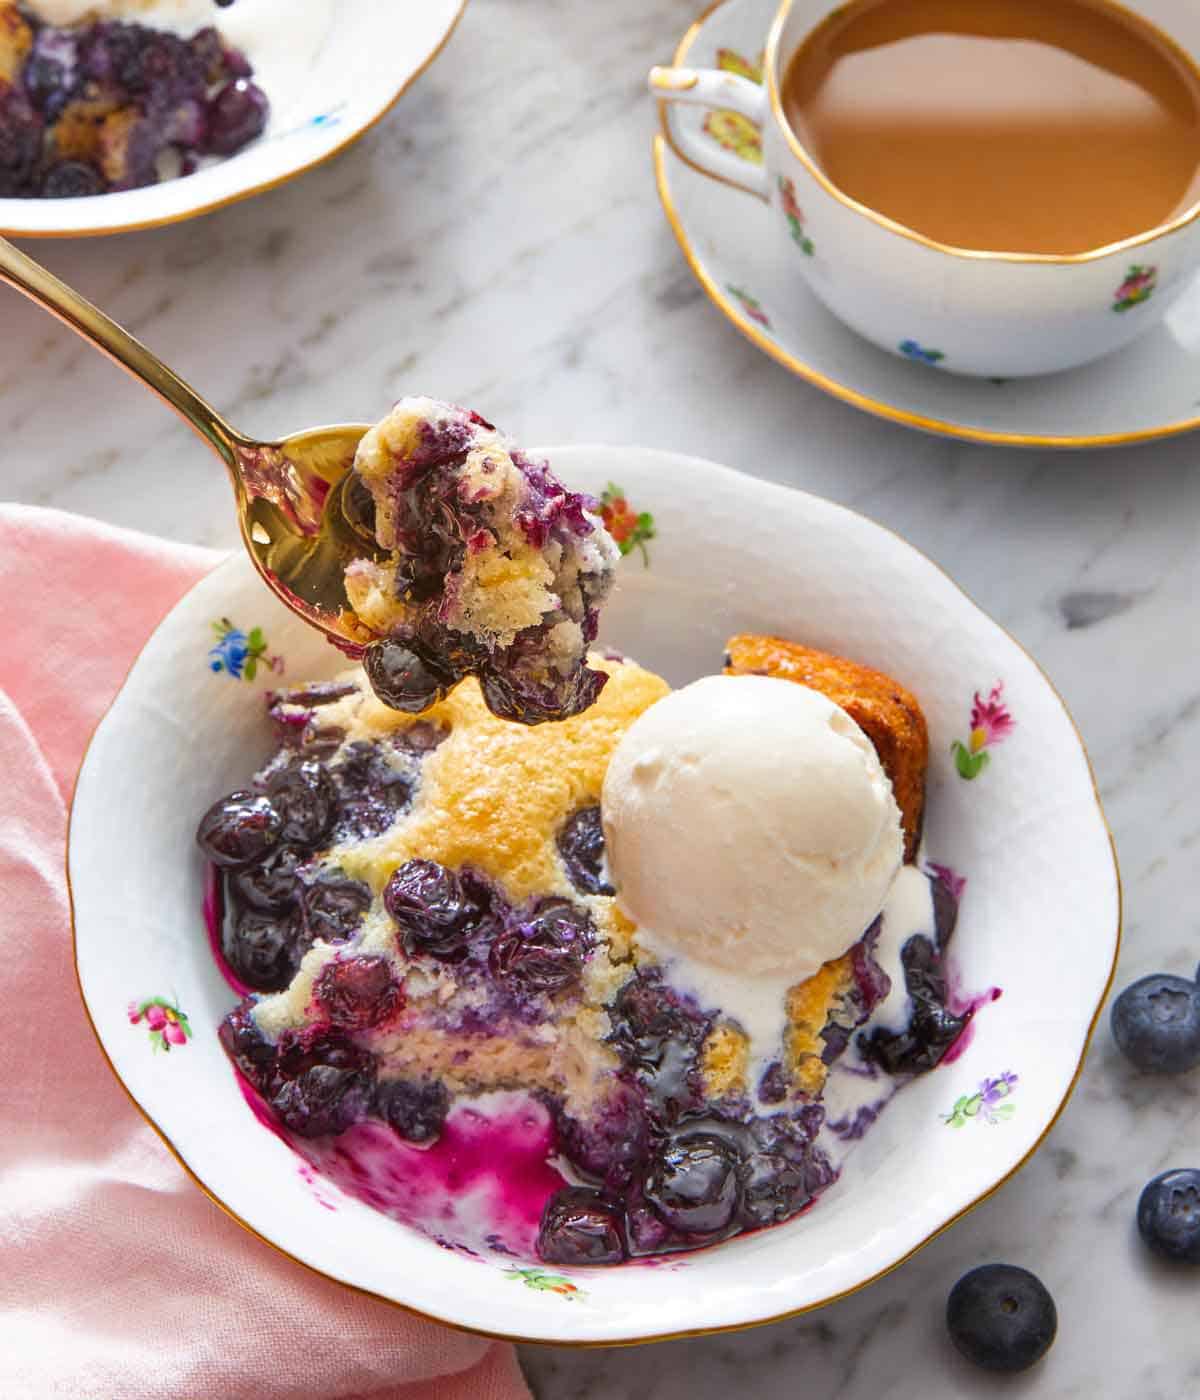 A spoonful of blueberry cobbler lifted from a bowl of cobbler and ice cream.